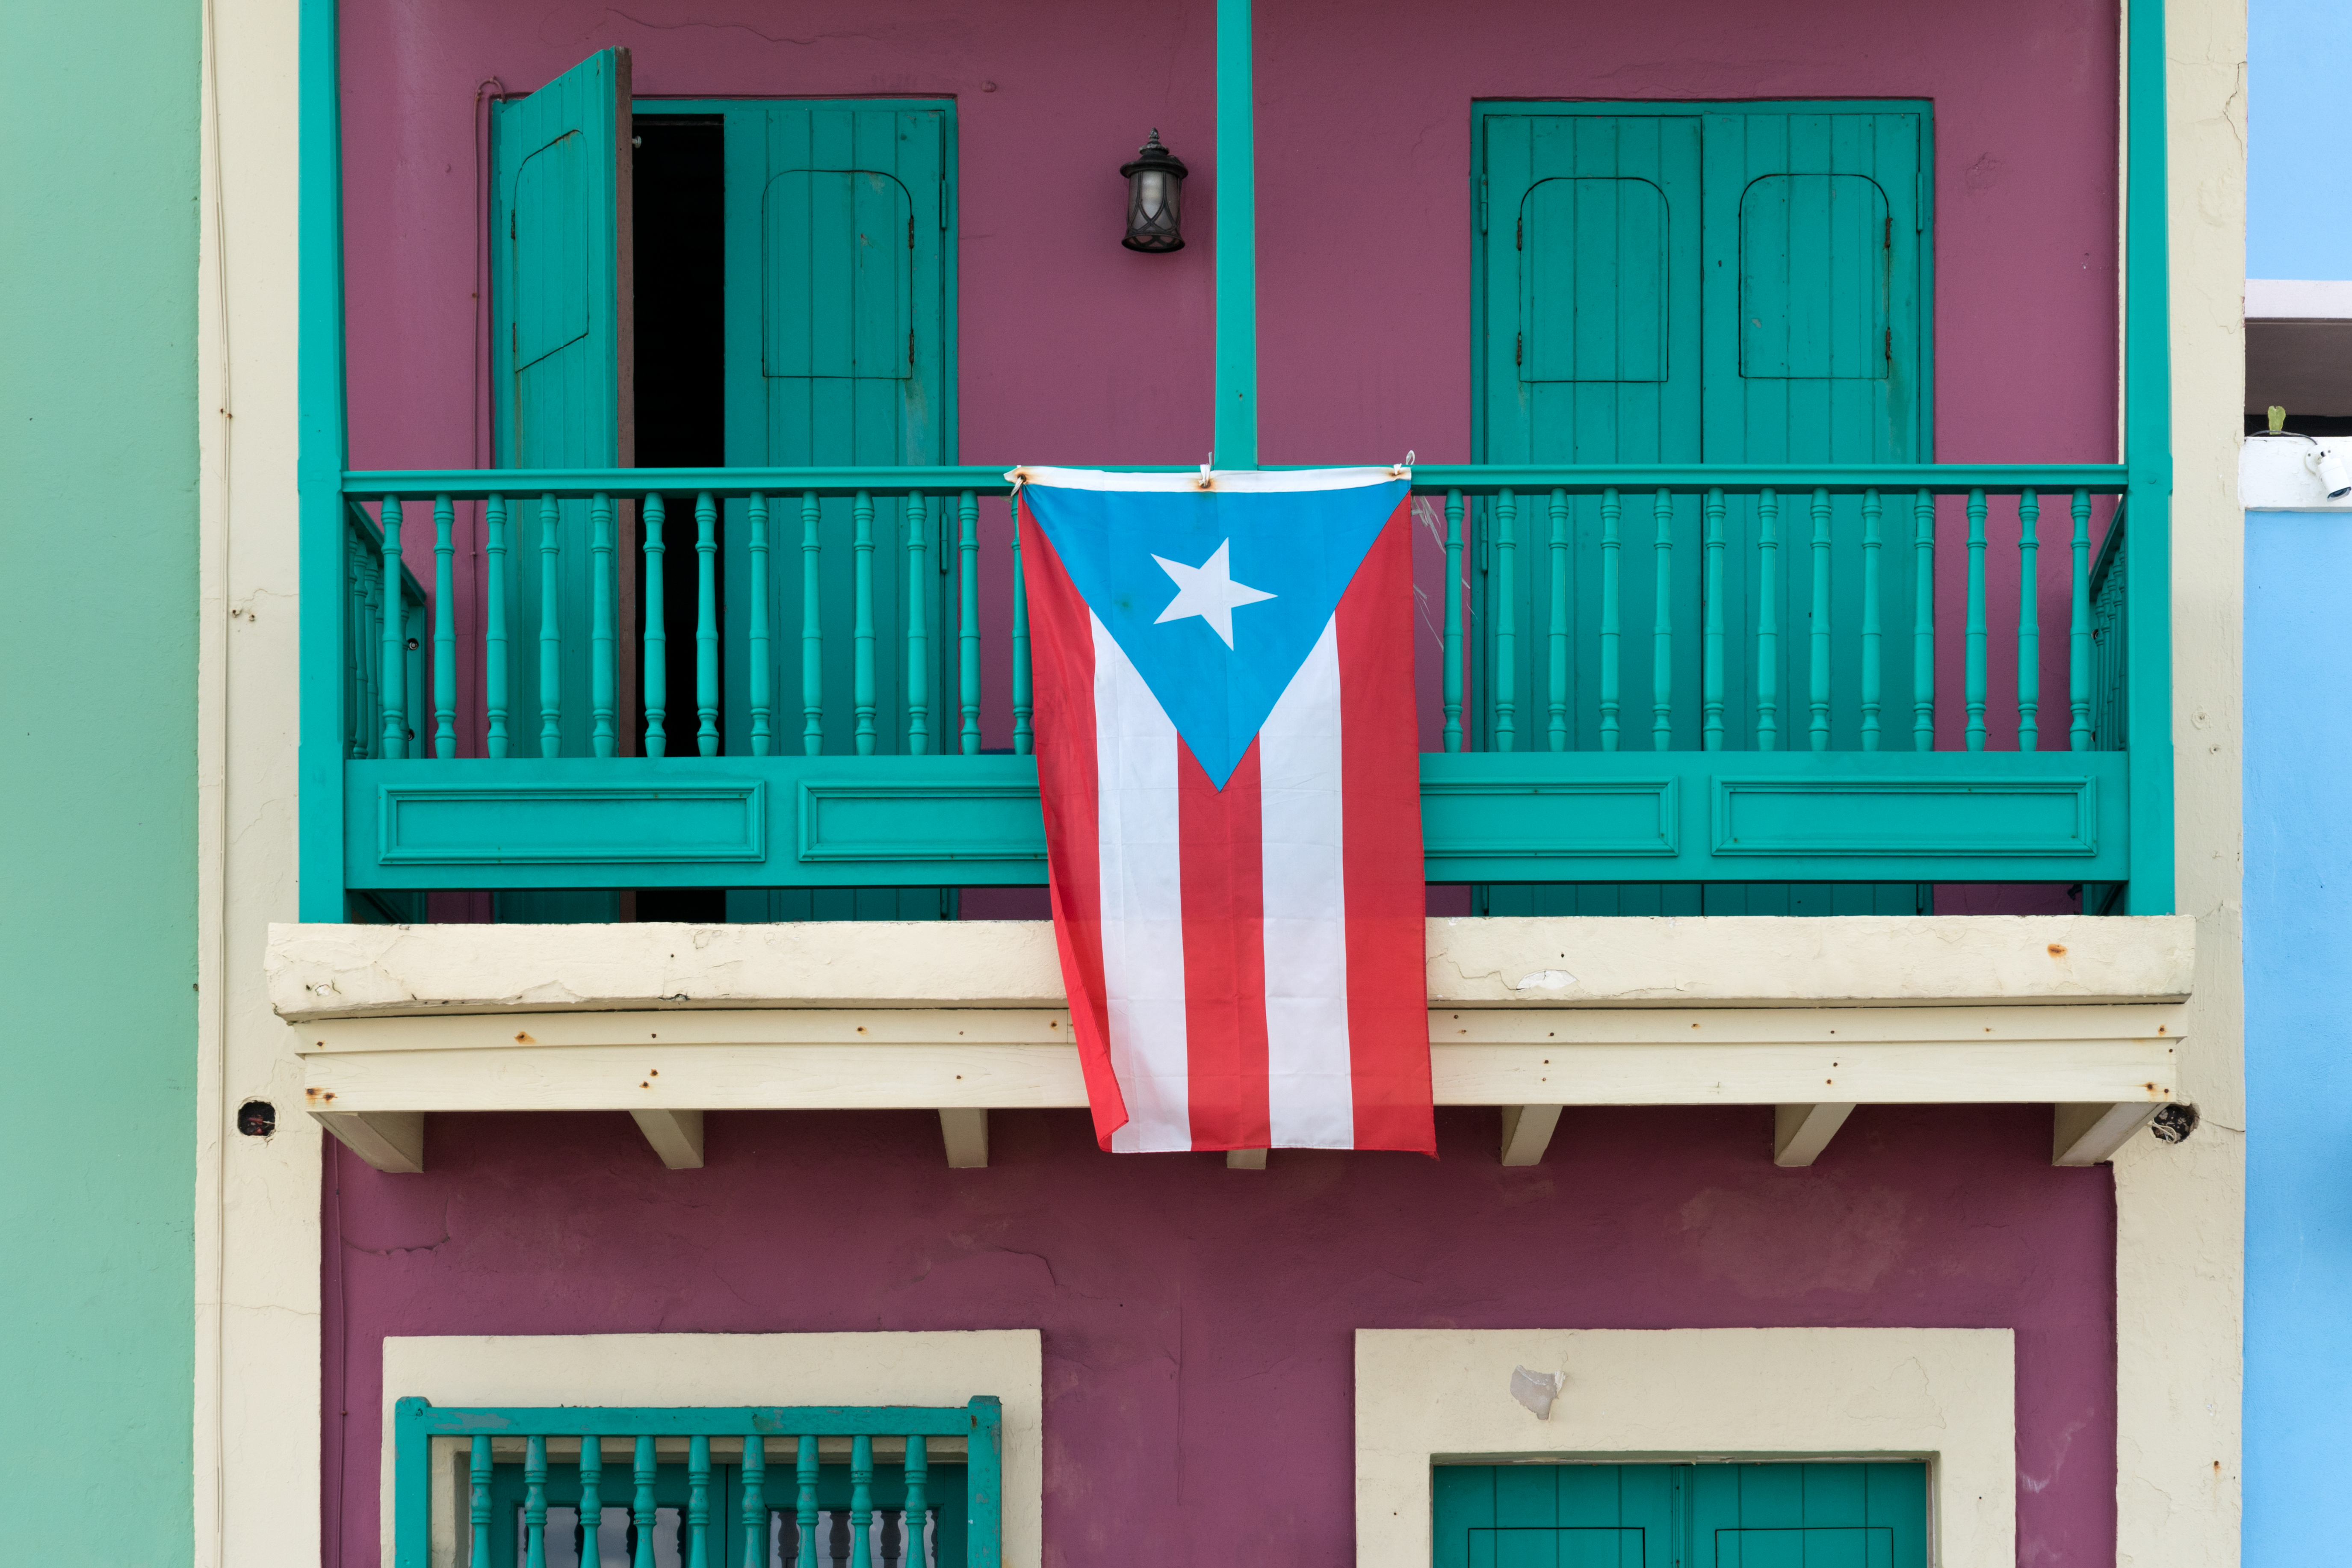 A Puerto Rican flag hanging on the balcony of a green building